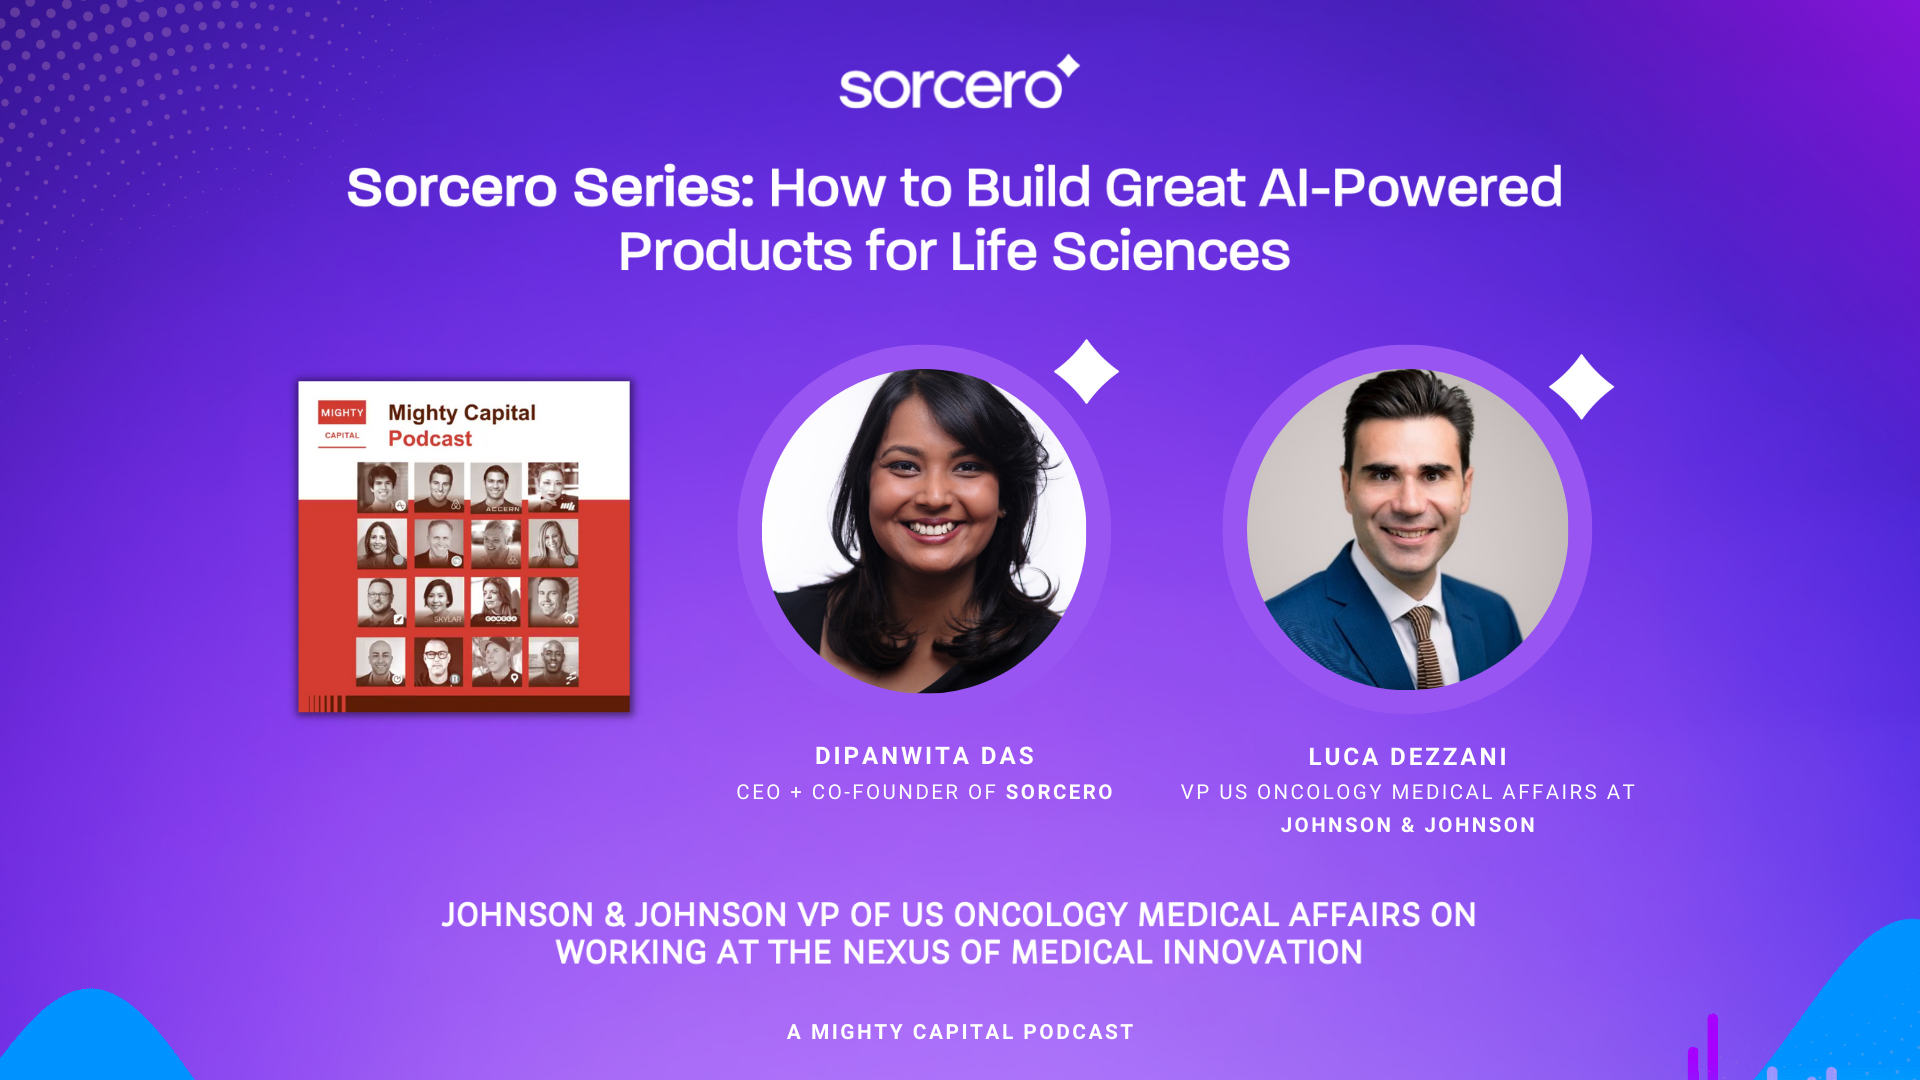 Sorcero Podcast Series: J&J VP of US Oncology Medical Affairs on Working at the Nexus of Medical Innovation